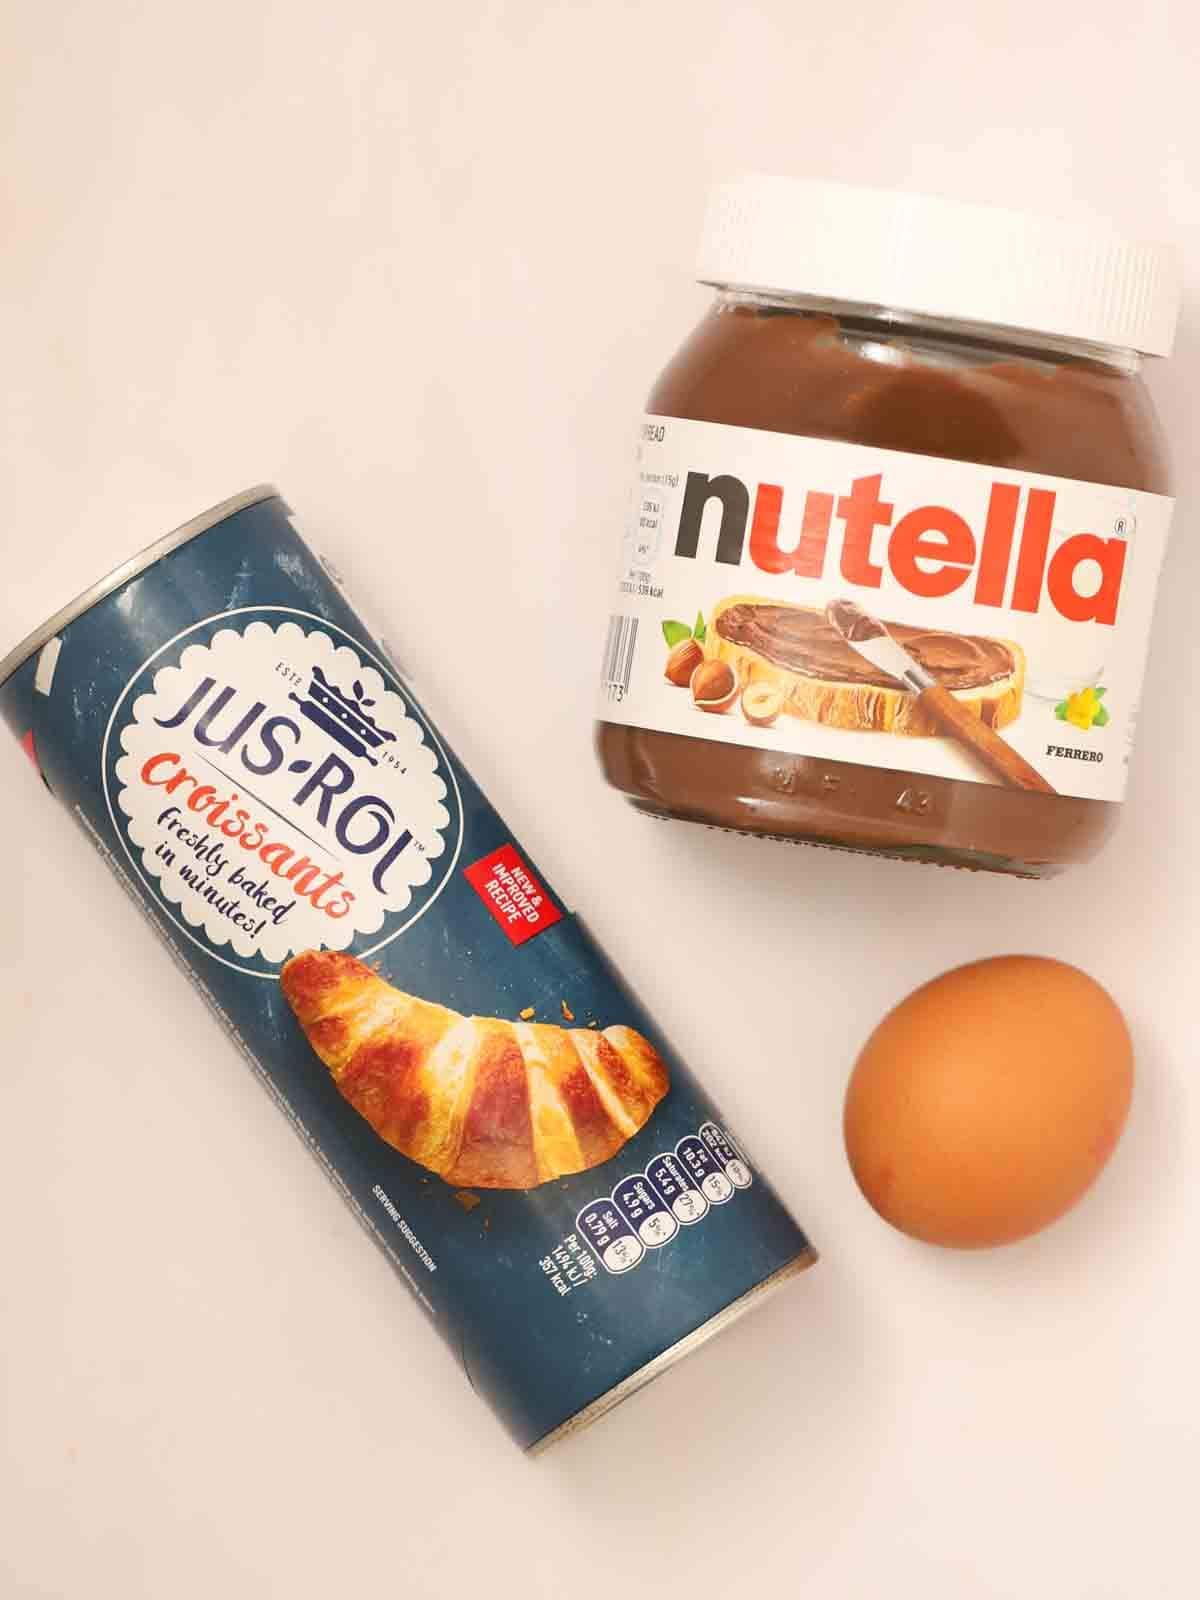 A bird's eye view of three ingredients - a jar of nutella, croissant pastry and one egg. Ingredients for the recipe Nutella Christmas Tree.